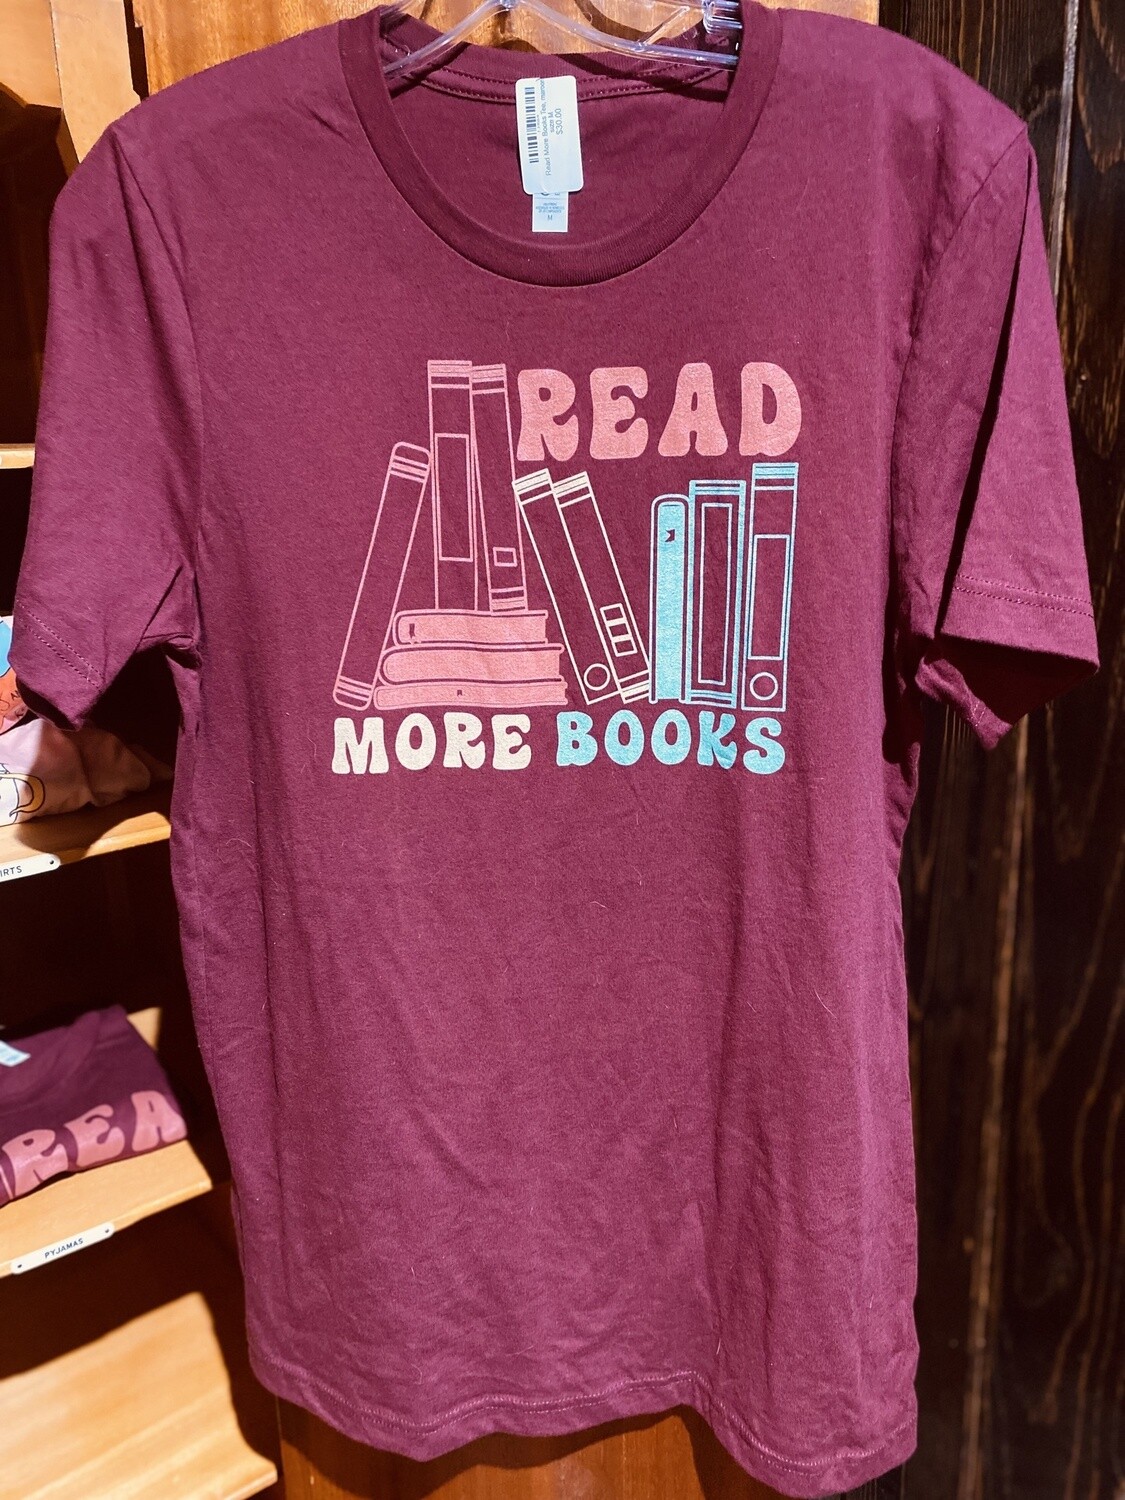 Read More Books Tee, maroon, size S